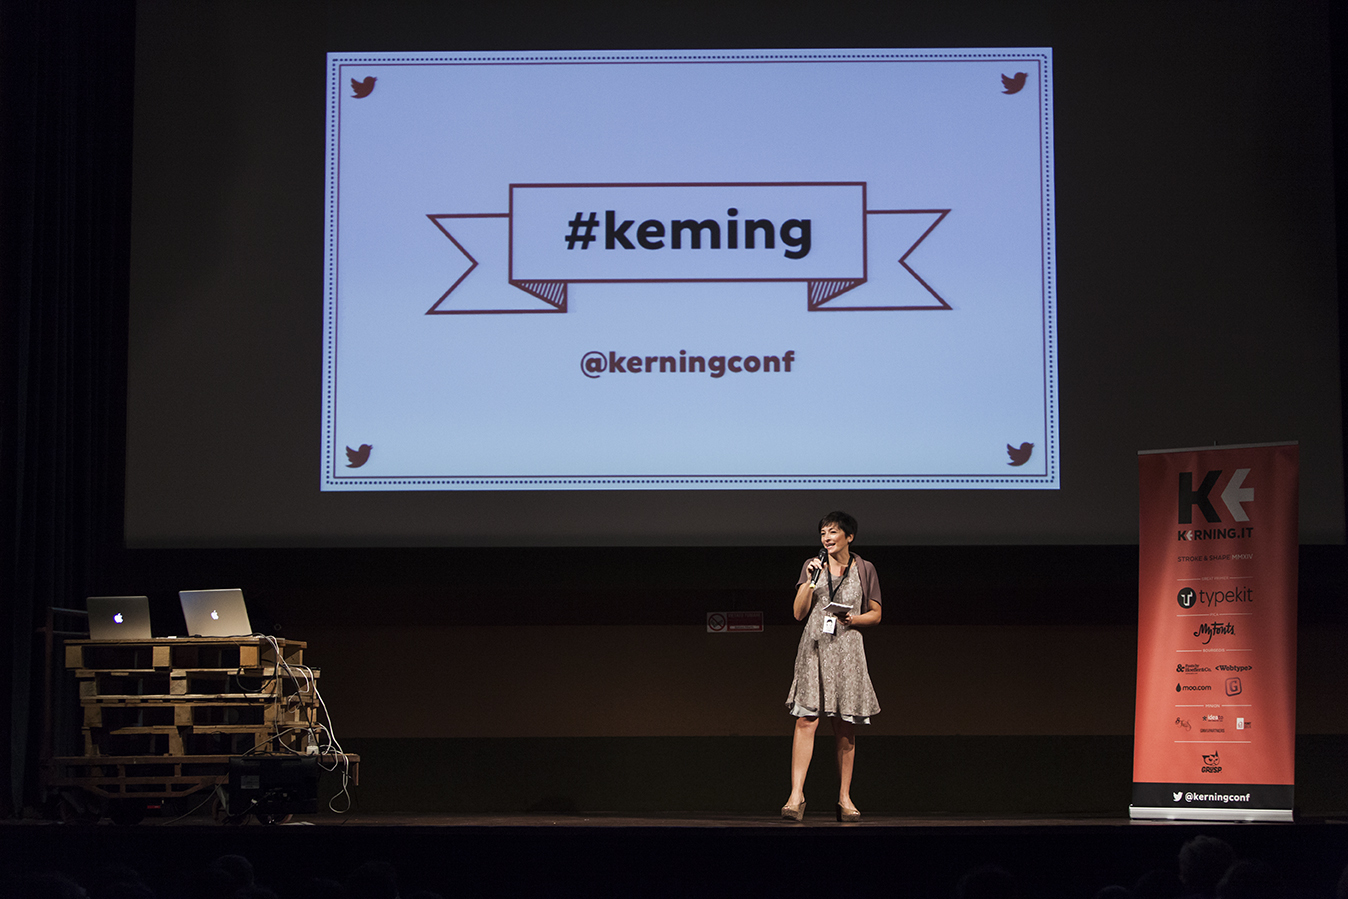 For the third consecutive year the wonderful Simone Wolf will moderate the day of presentations on June. Kerning still has the best hashtag ever.